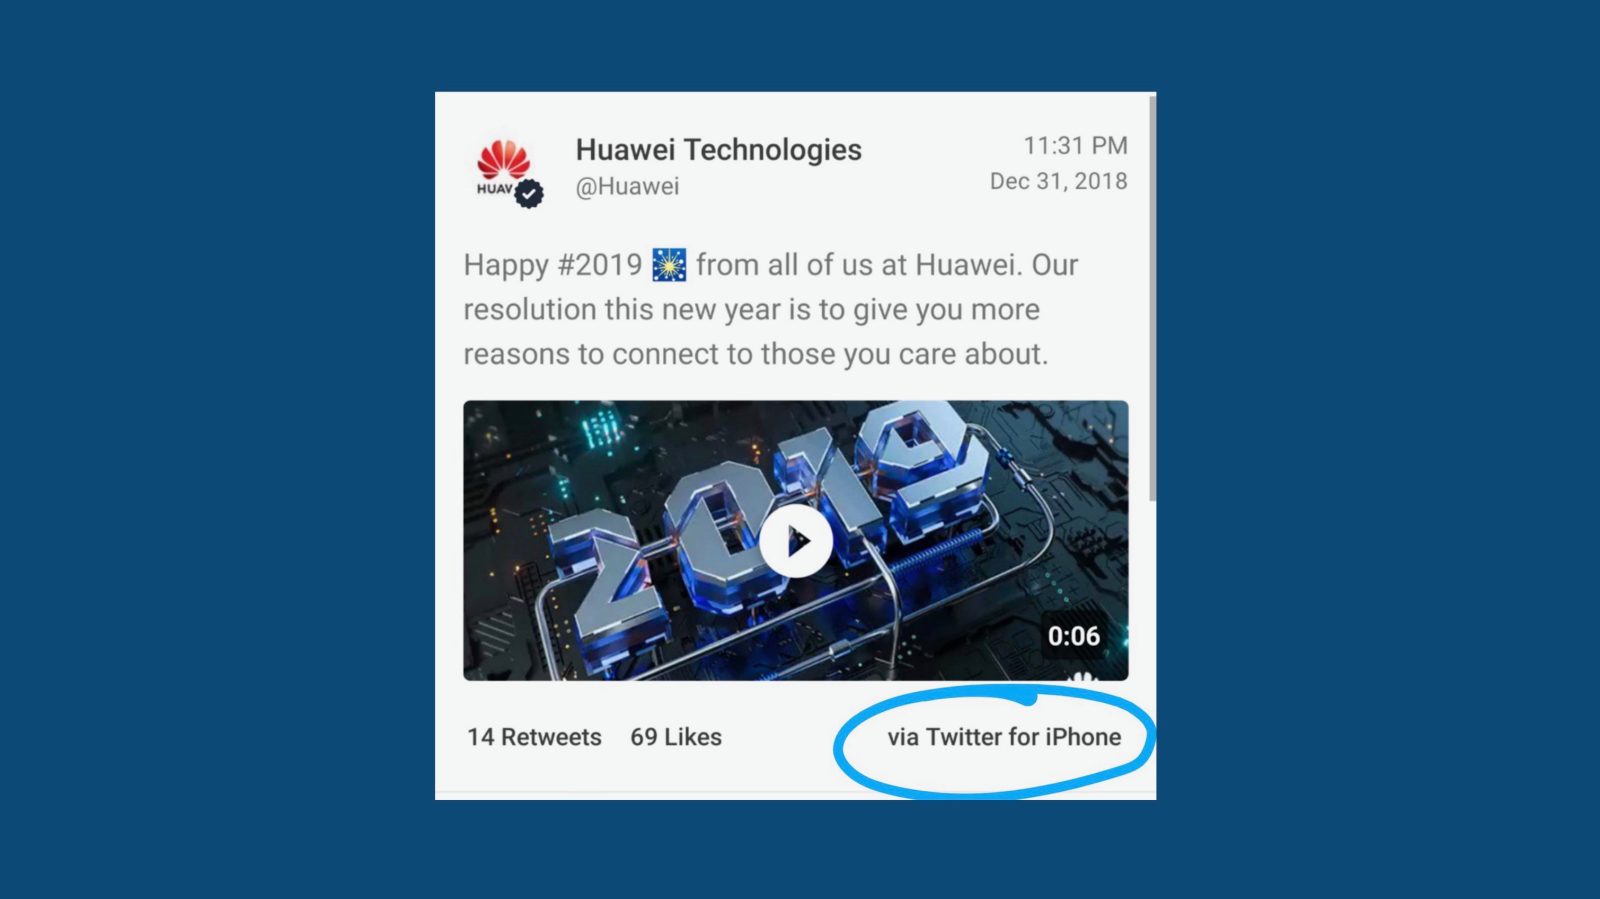 Huawei Employee Who Tweeted with iPhone Got Demoted